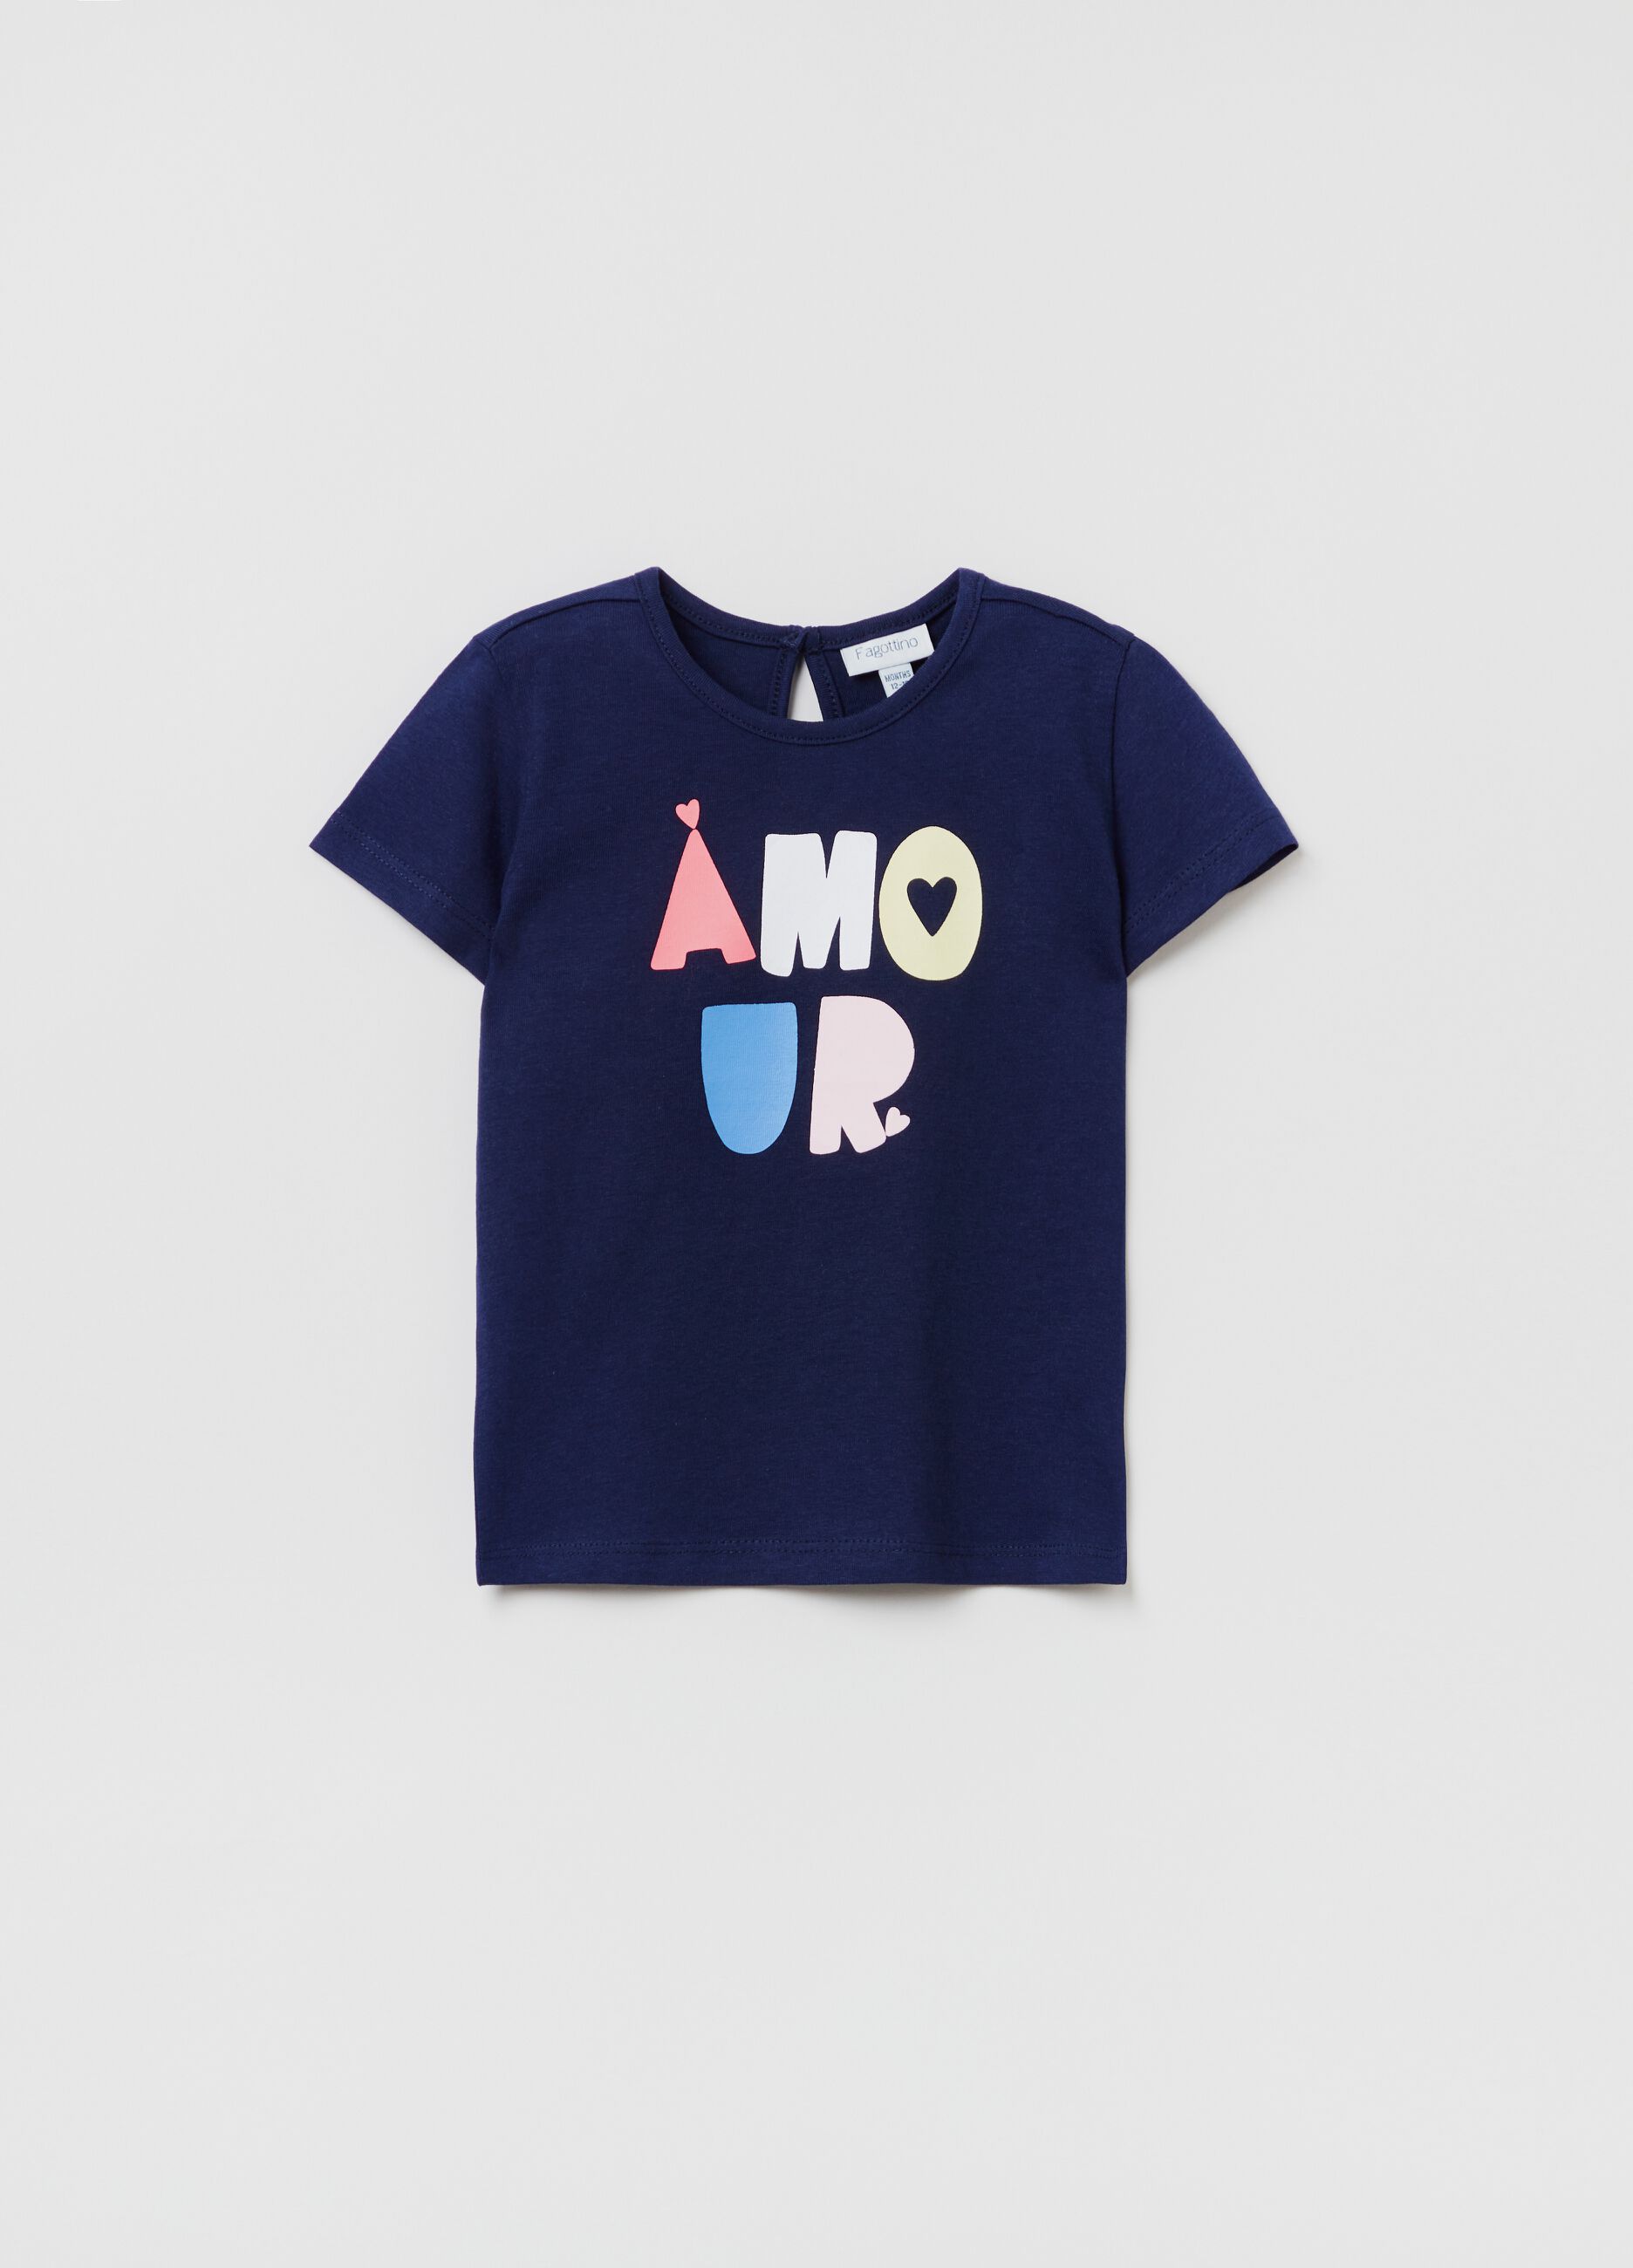 Cotton T-shirt with printed lettering